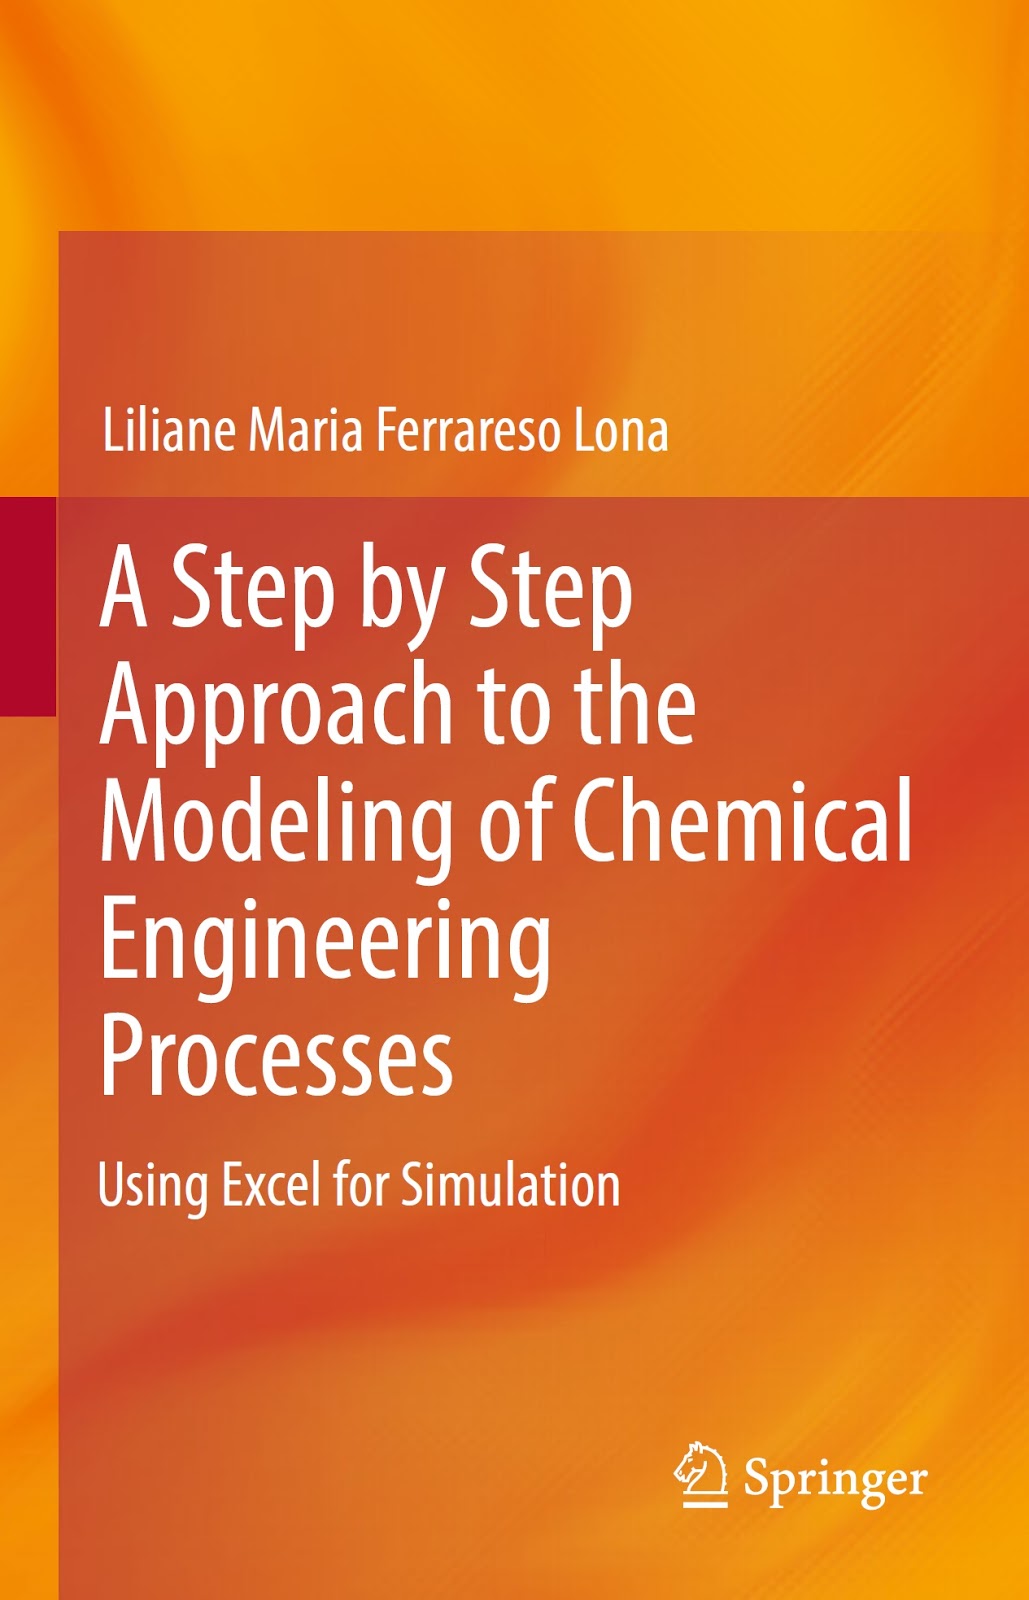 engineering-library-ebooks-a-step-by-step-approach-to-the-modeling-of-chemical-engineering